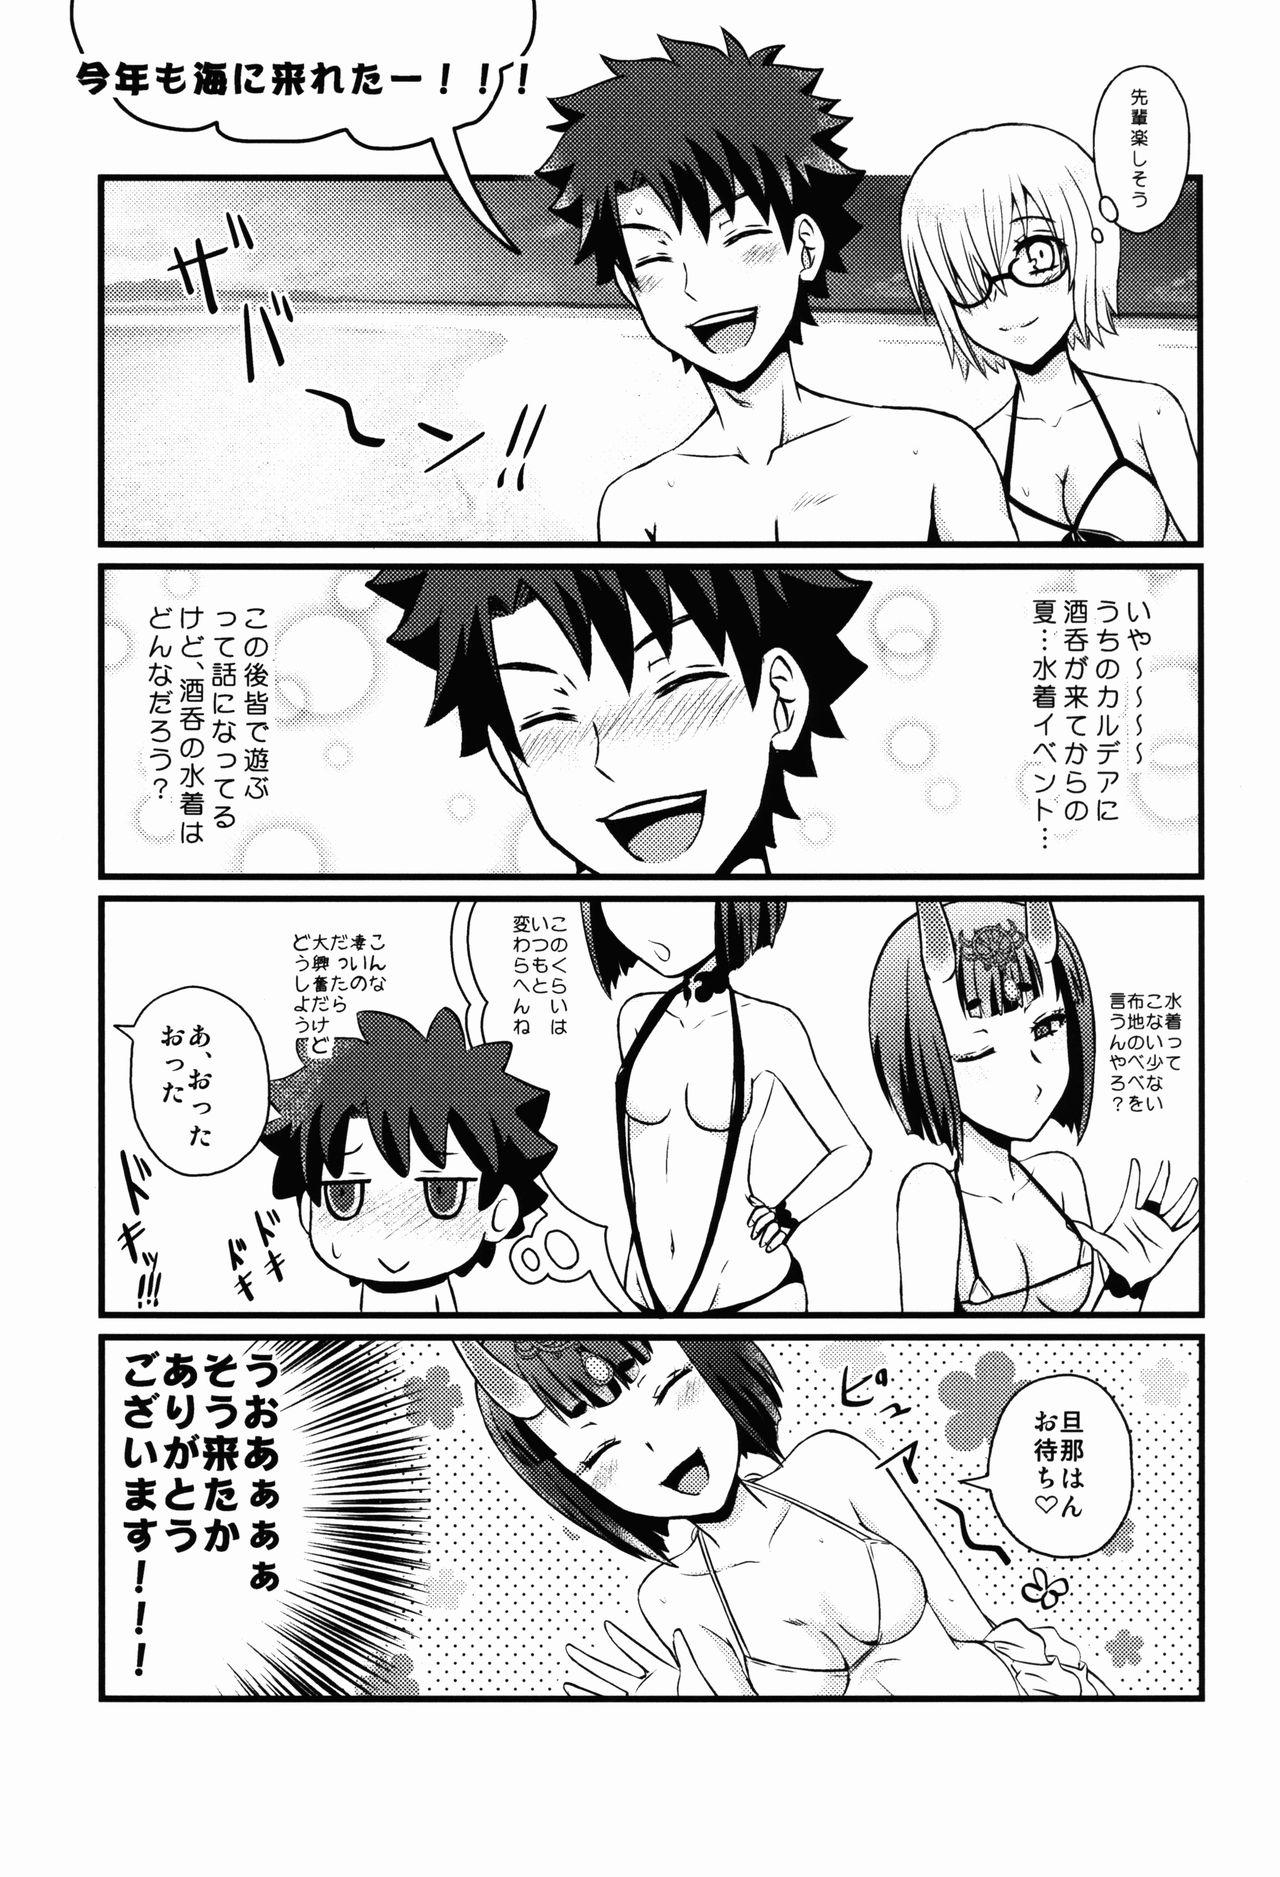 Reverse COMET:10 - Fate grand order Thief - Page 5